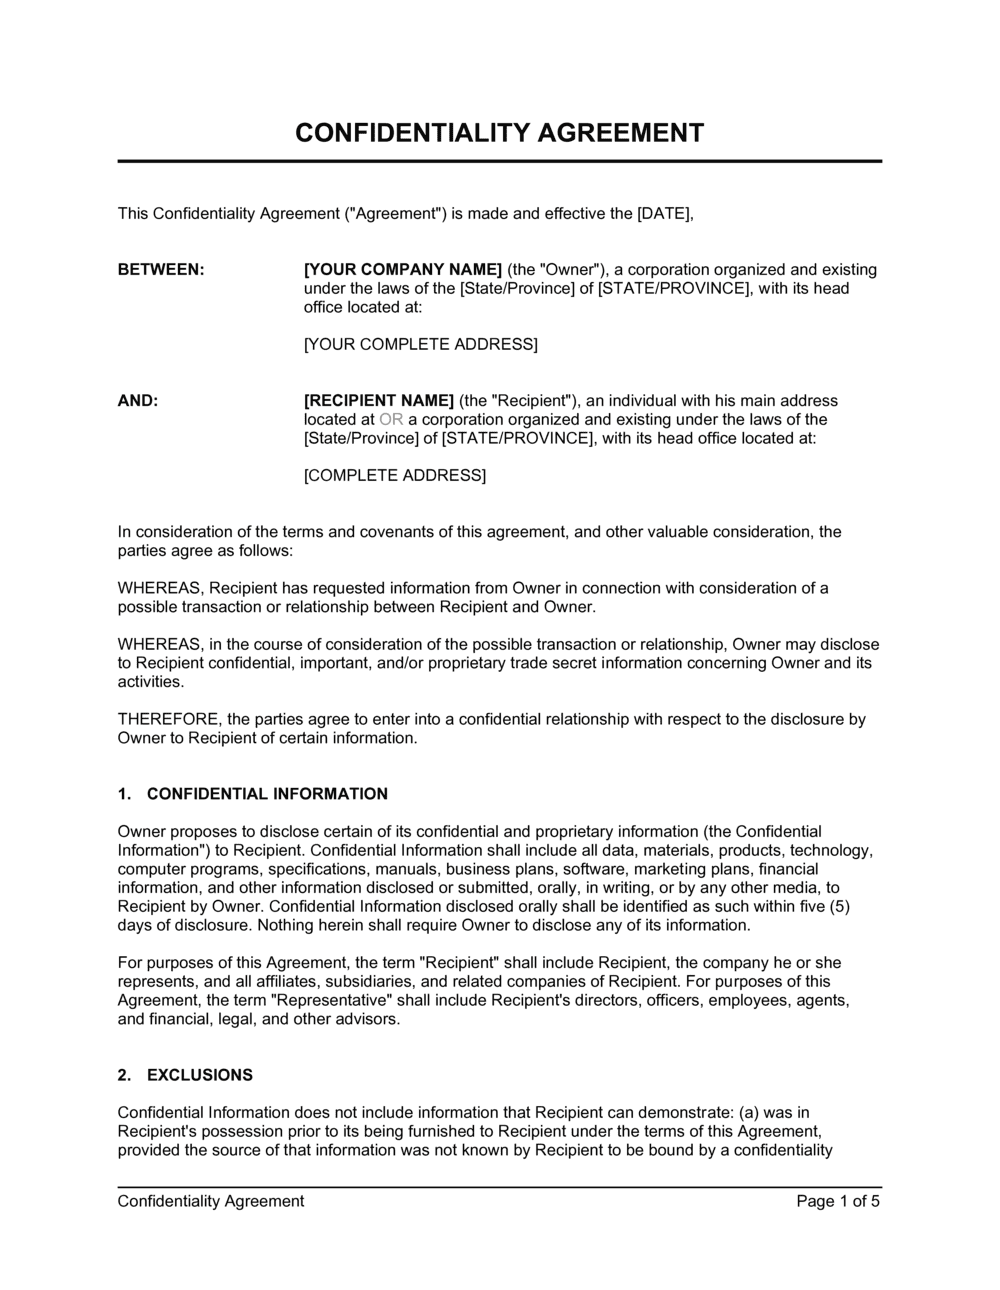 Confidentiality Agreement Template  by Business-in-a-Box™ For accountant confidentiality agreement template